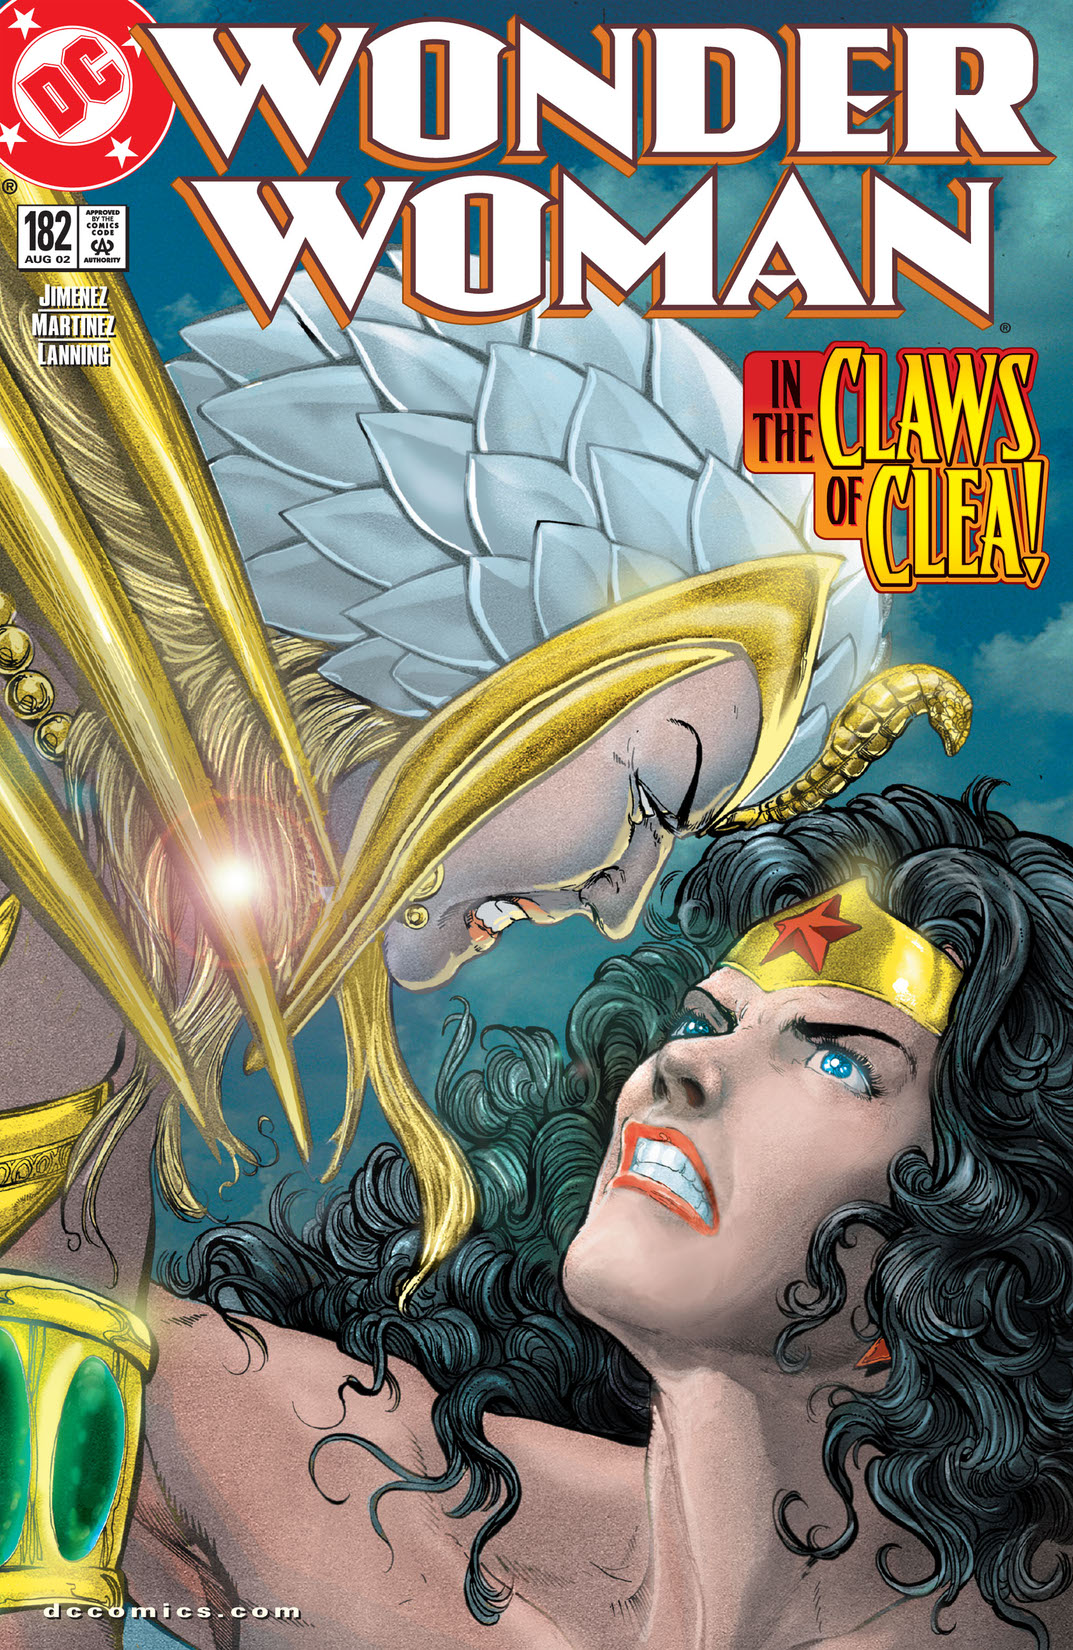 Wonder Woman (1986-) #182 preview images